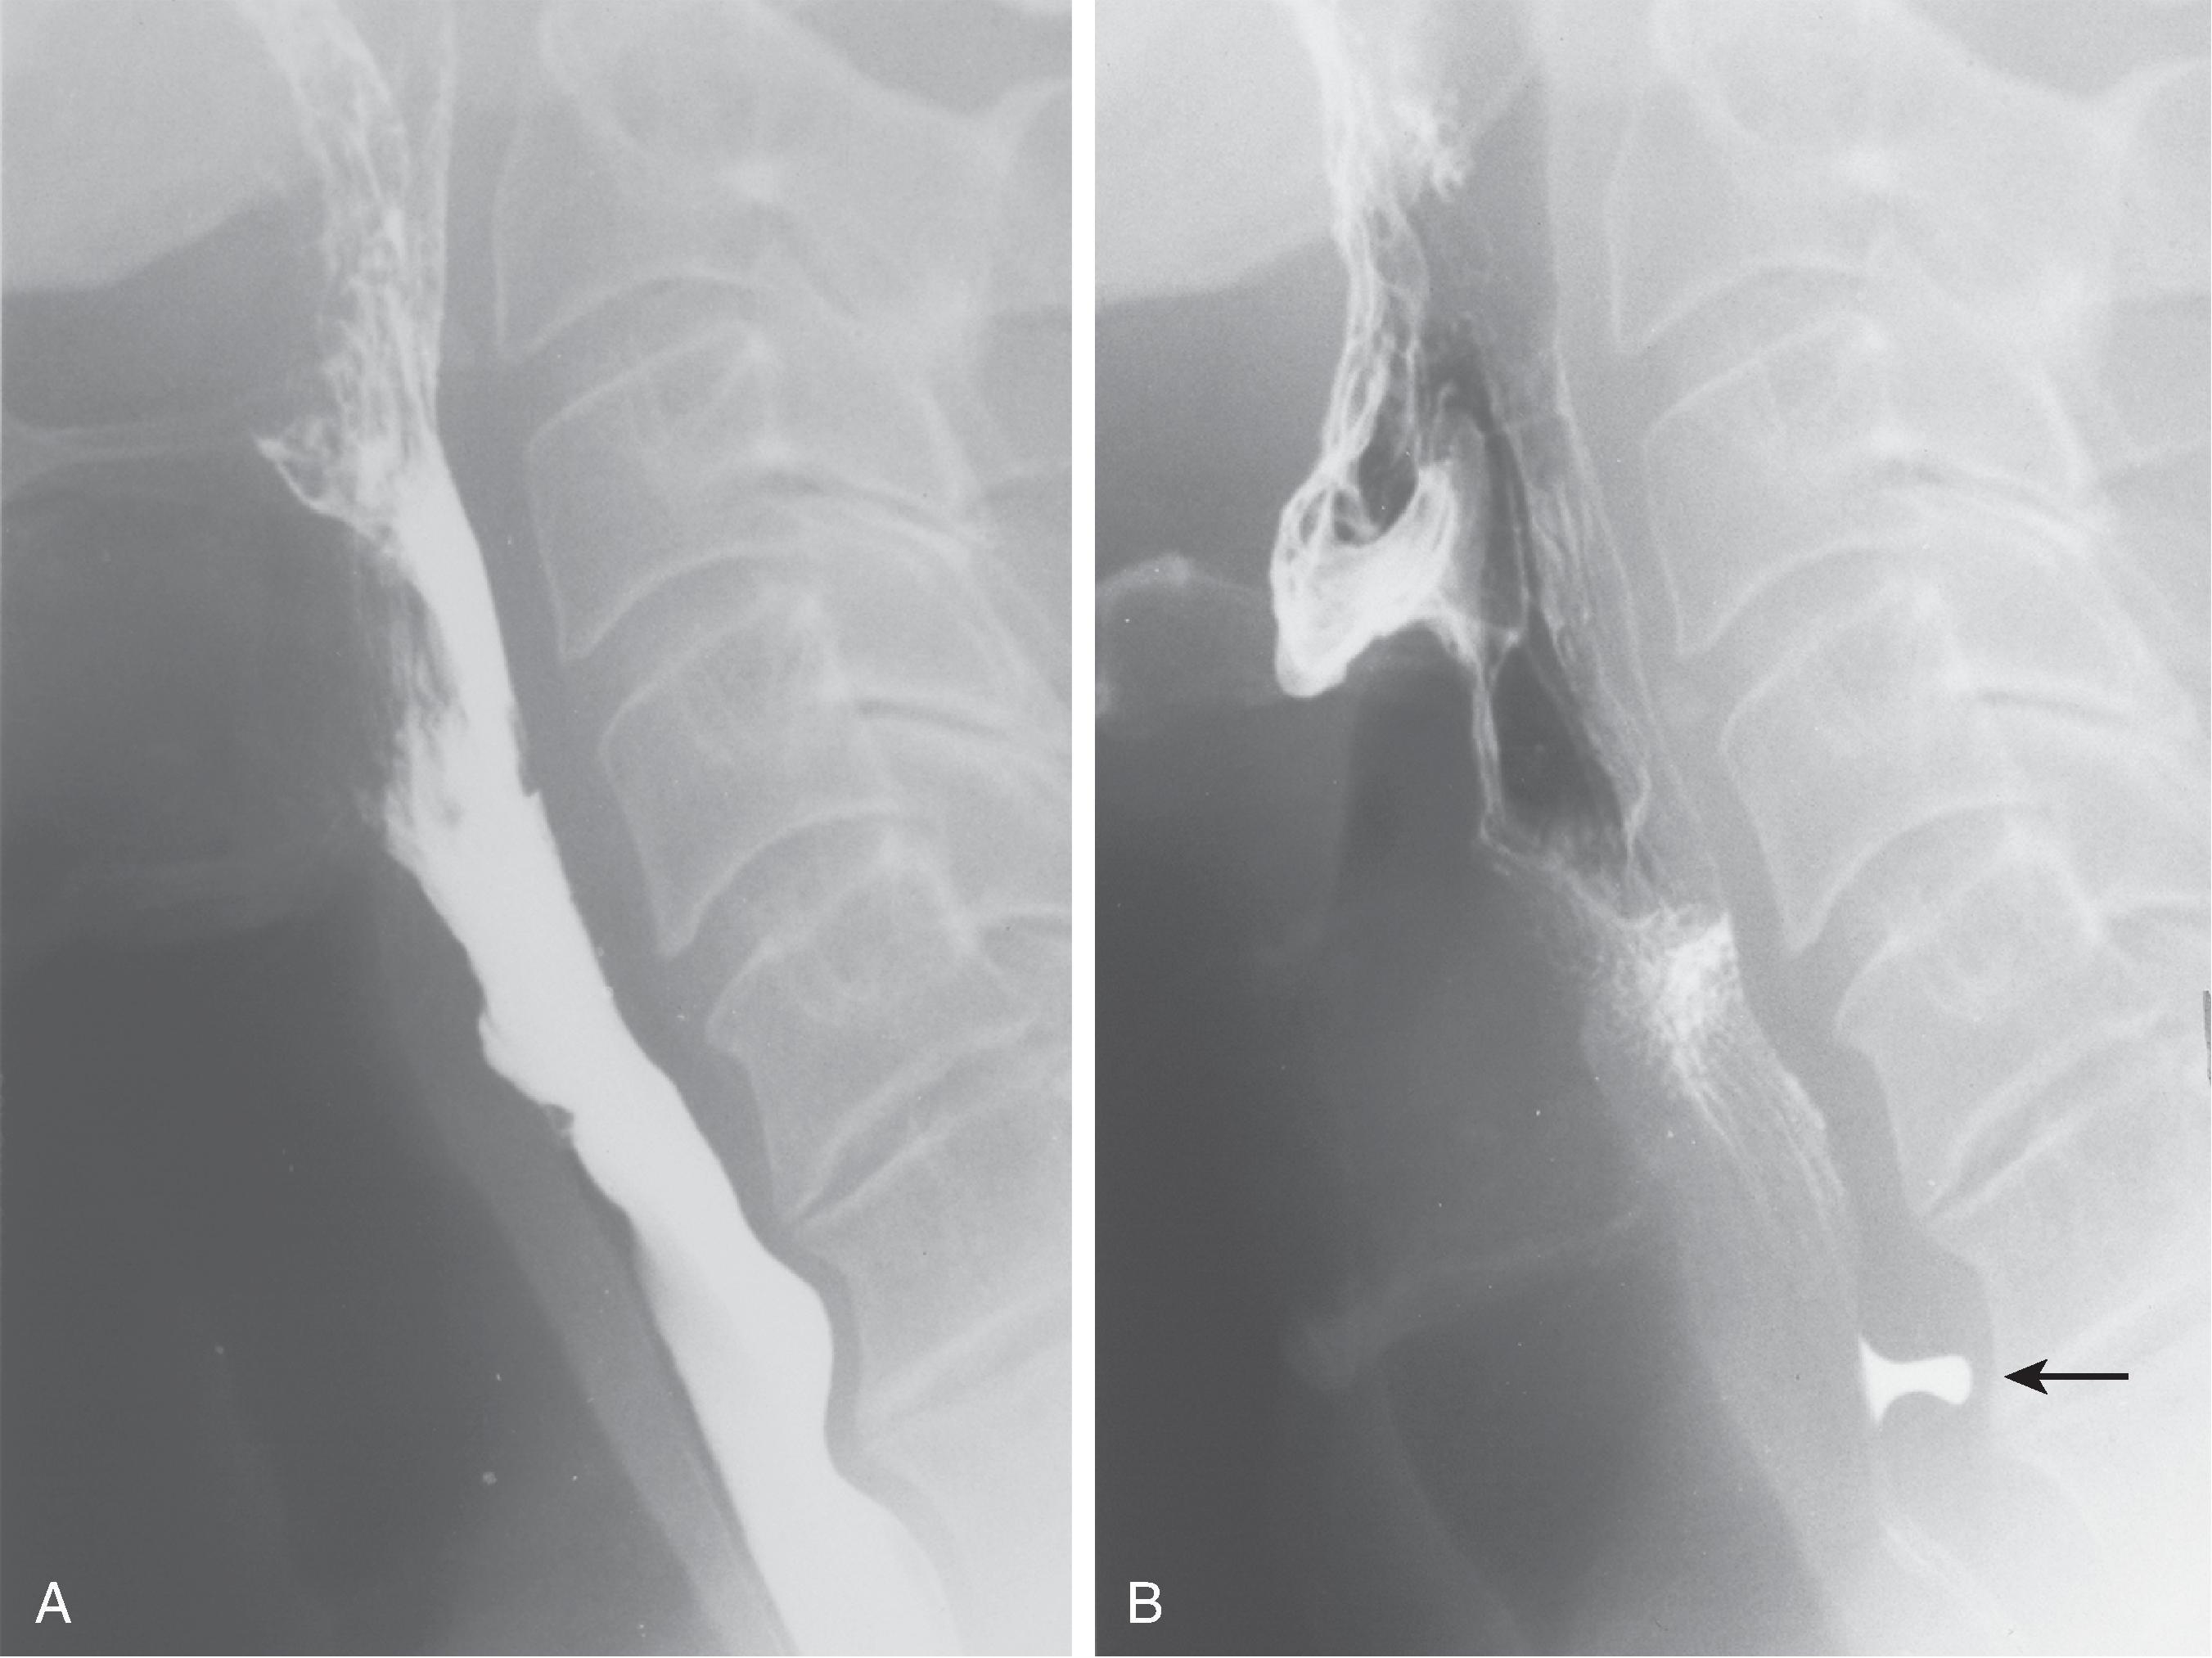 Fig. 5.6, Pseudo-Zenker’s diverticulum. (A) Lateral view of the pharynx during swallowing shows no evidence of a posterior pouch as the bolus passes through the pharyngoesophageal segment. (B) A repeat view just after swallowing shows transient trapping of barium ( arrow ) above an early-closing cricopharyngeal bar that could be mistaken for a tiny Zenker’s diverticulum.